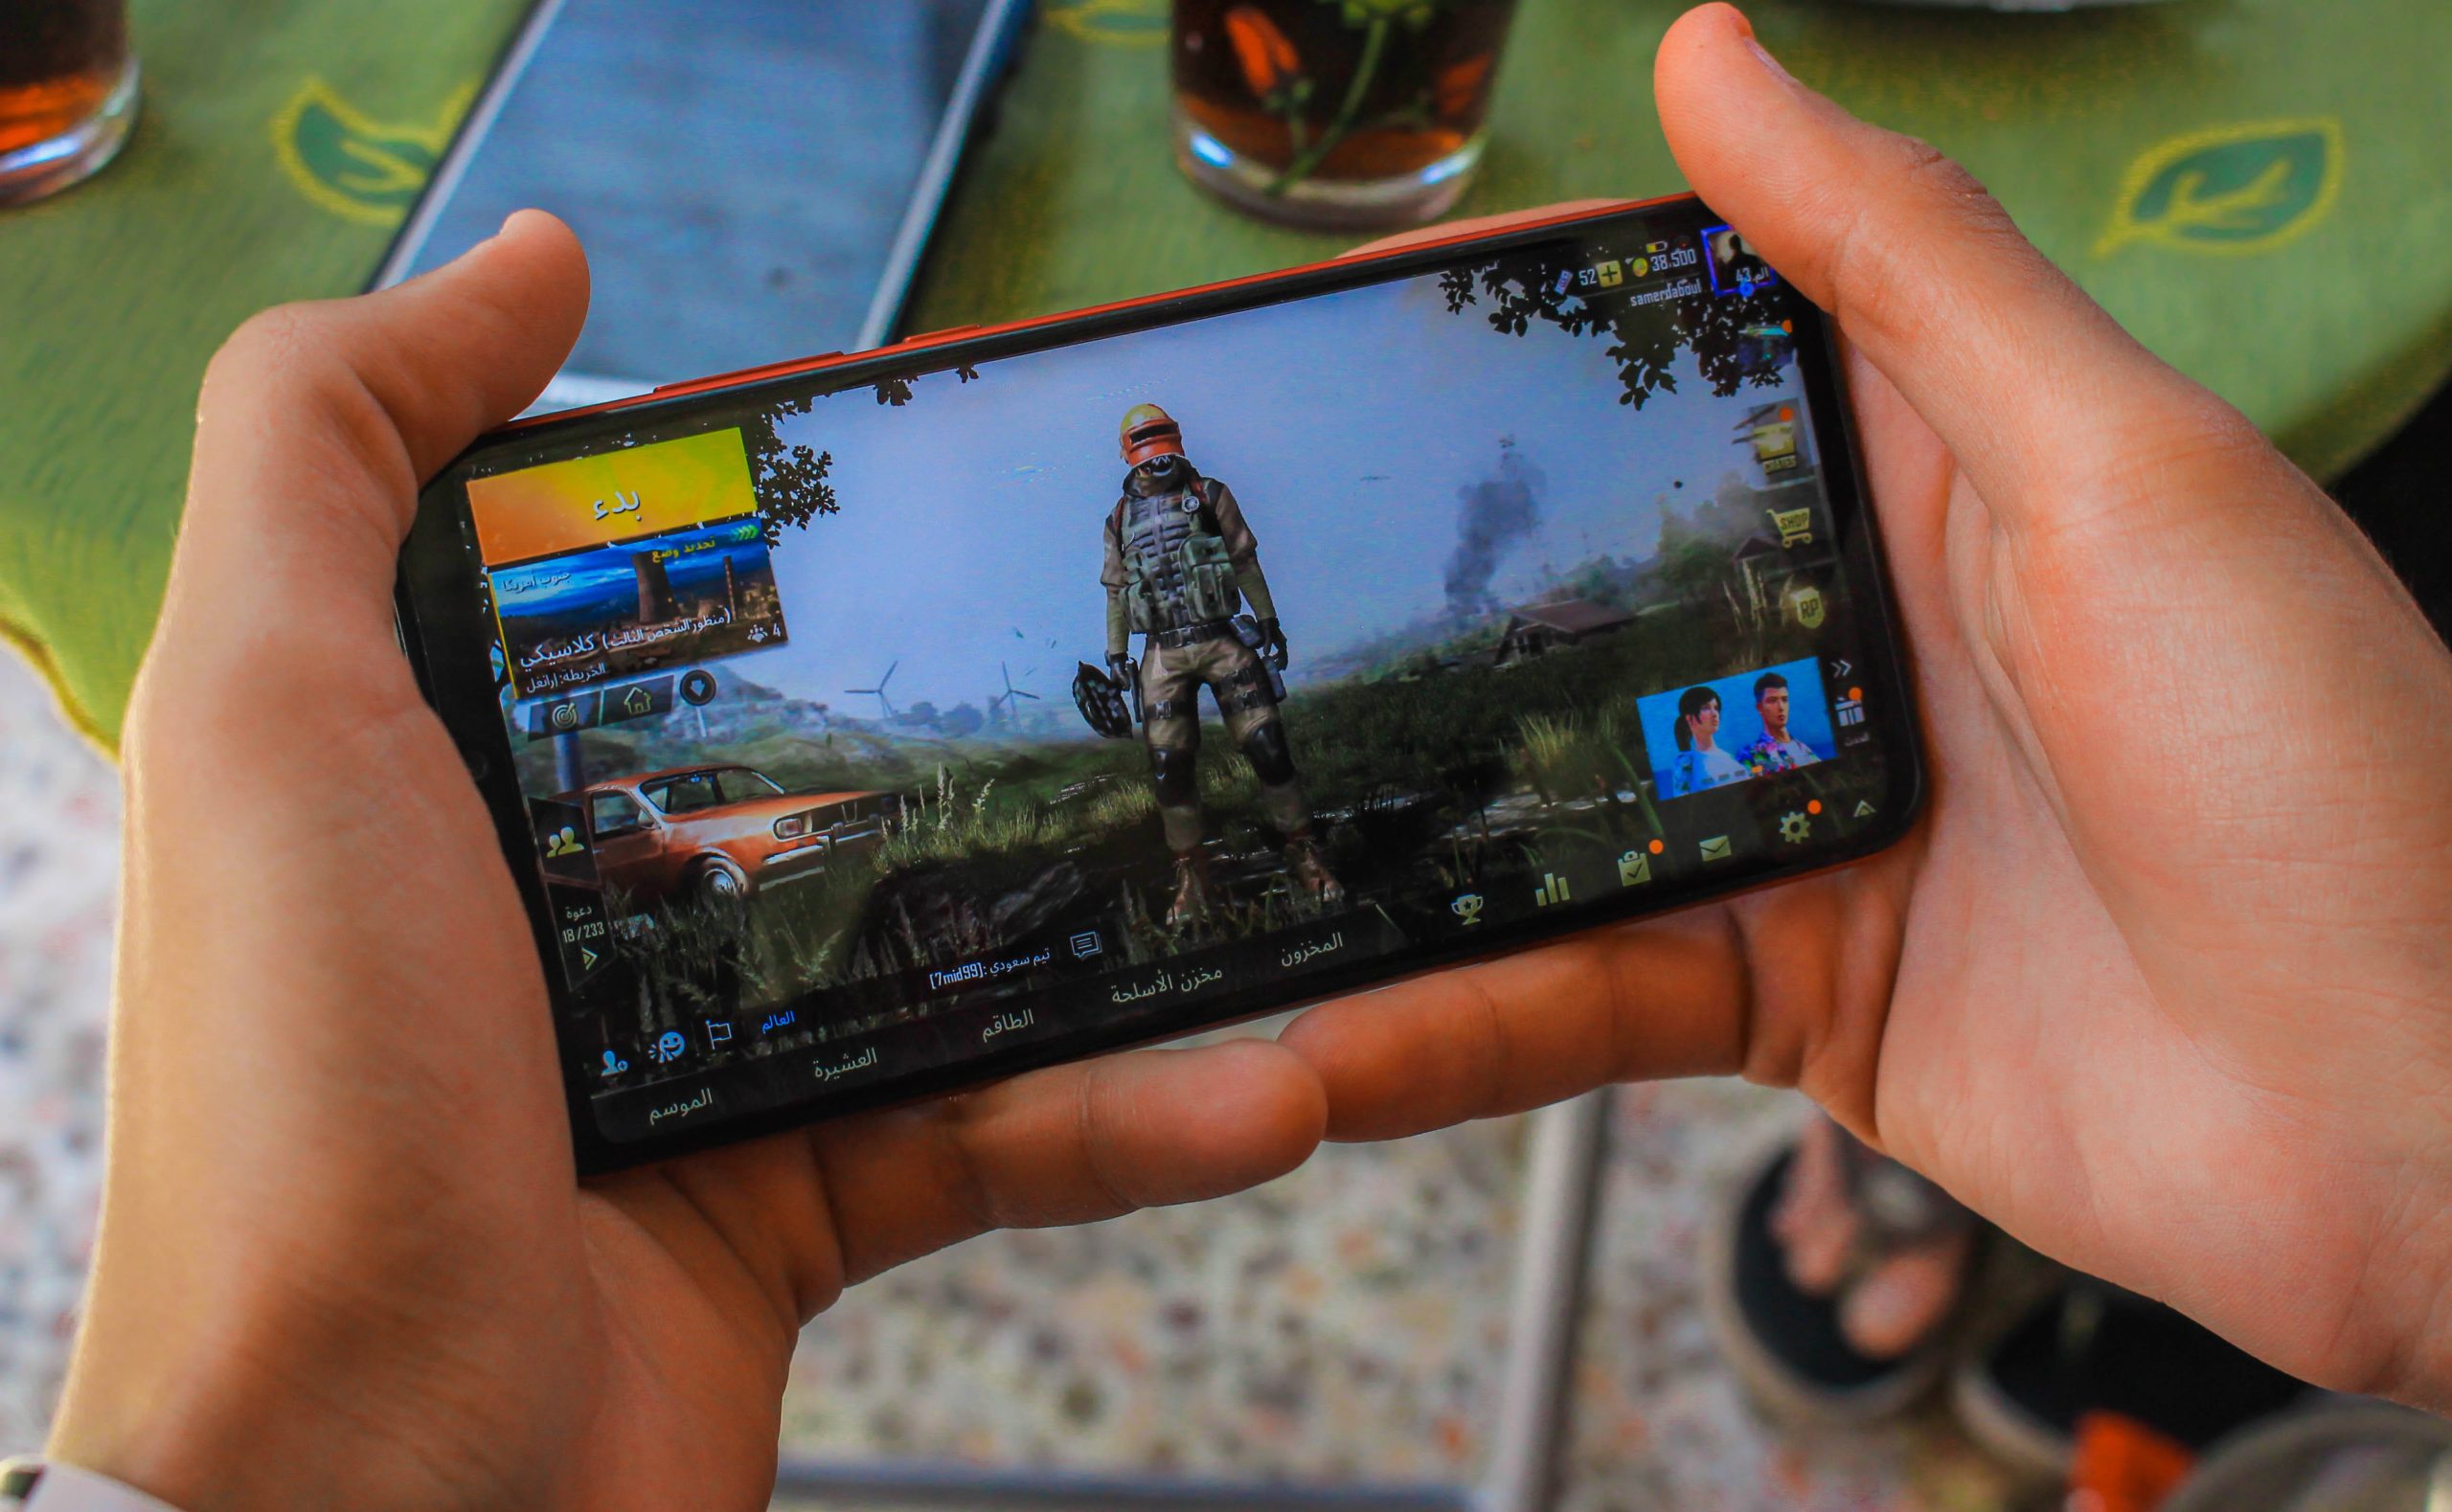 Phil Spencer: Xbox is working with partners on a mobile gaming